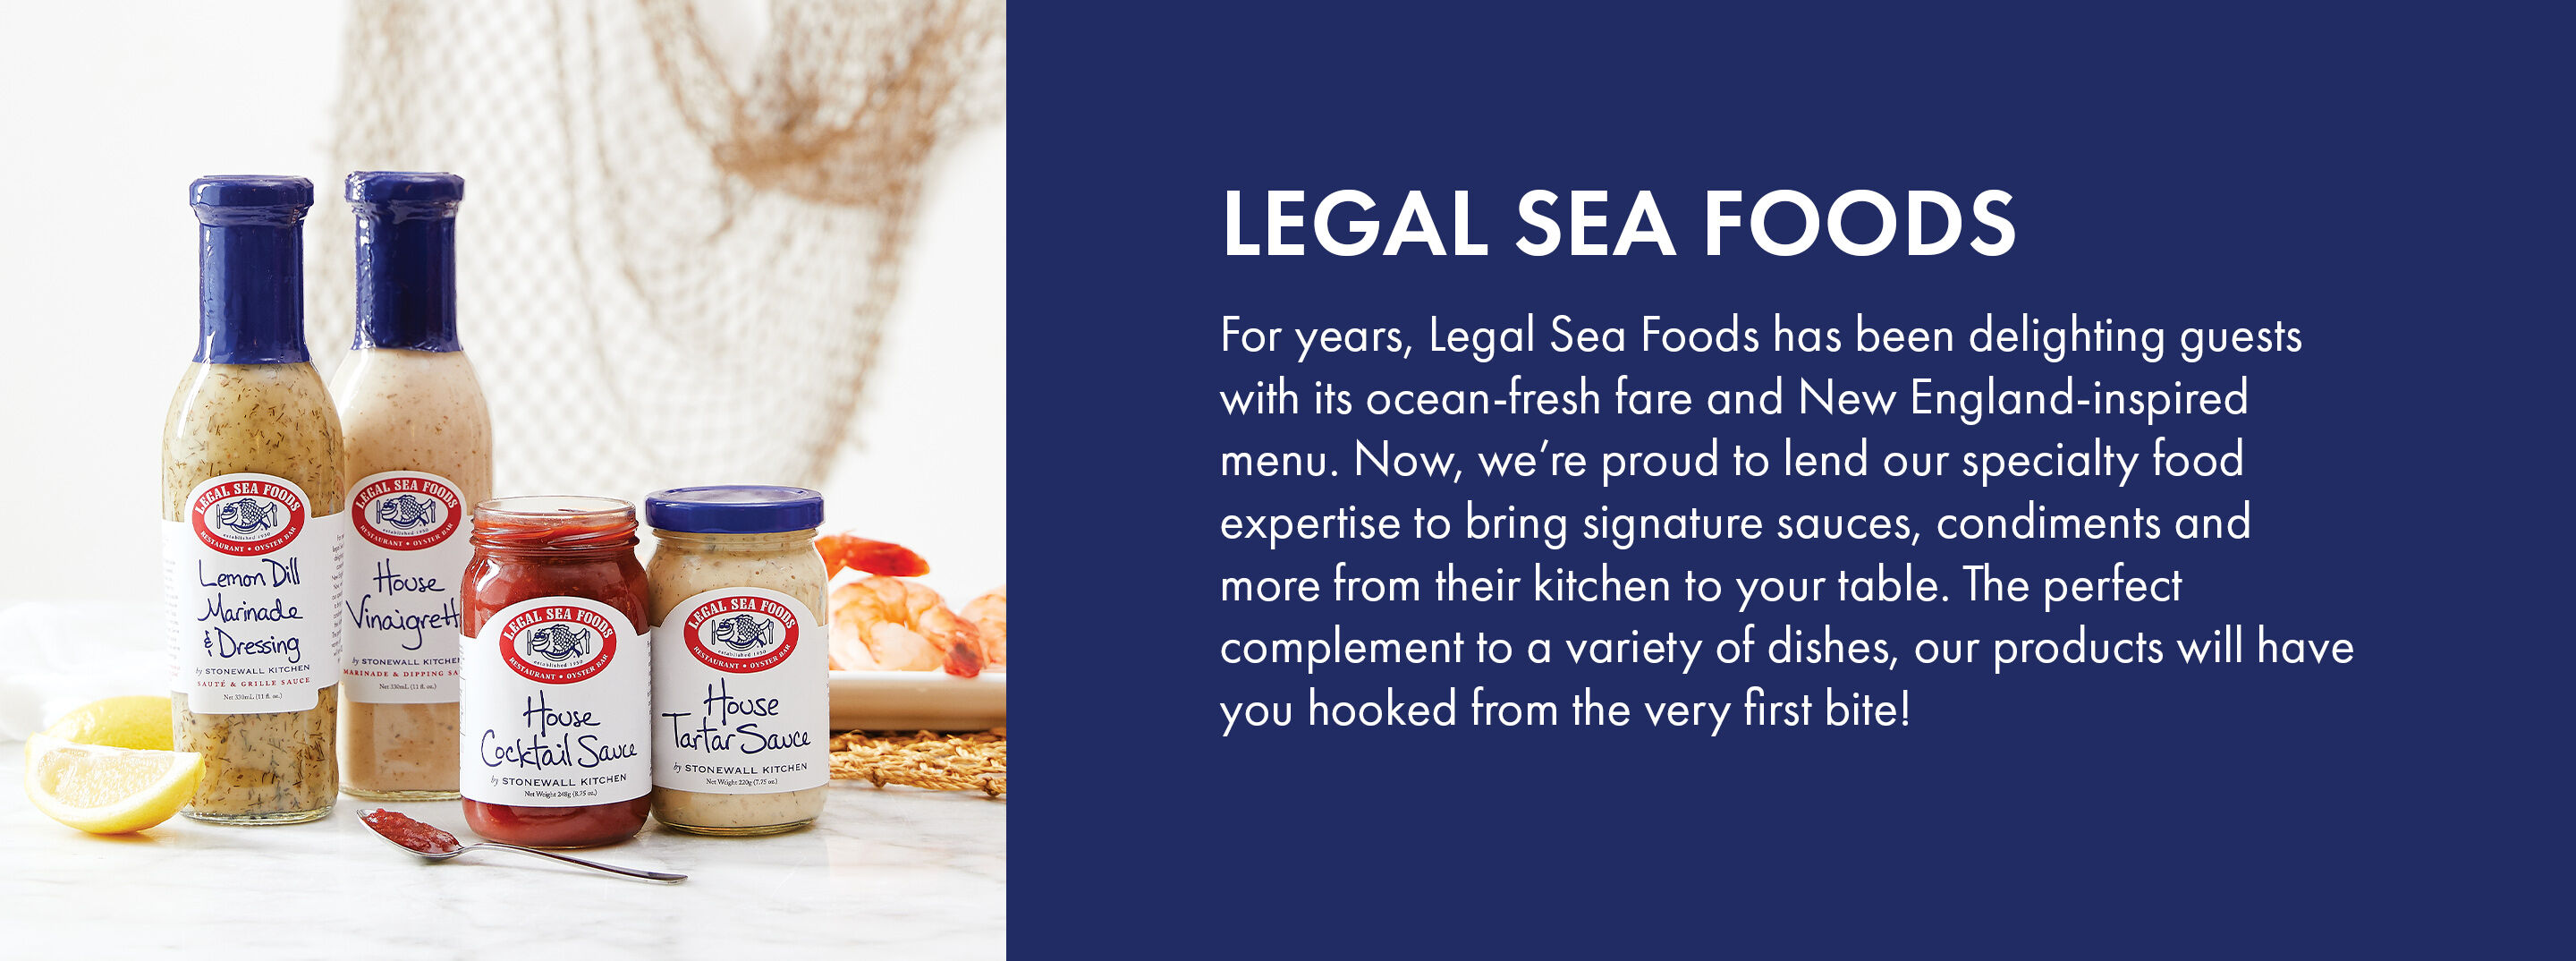 Legal Sea Foods | For years, Legal Sea Foods has been delighting guests with its ocean-fresh fare and New England-inspired menu. Now, we're proud to lend our specialty food expertise to bring signature sauces, condiments and more from their kitchen to your table. The perfect complement to a variety of dishes, our products will have you hooked from the very first bite!